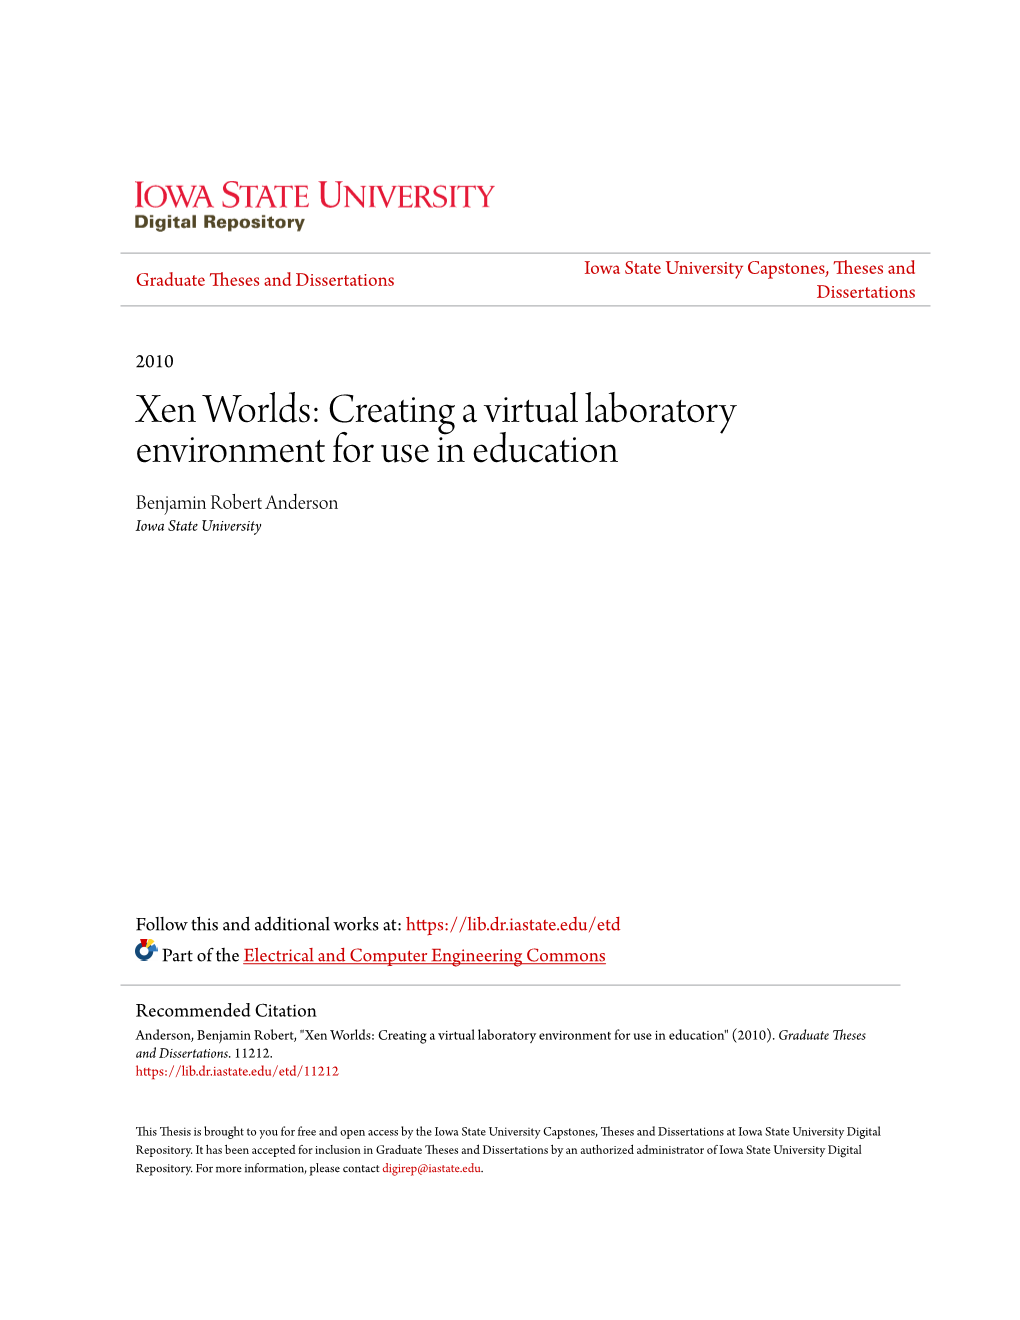 Xen Worlds: Creating a Virtual Laboratory Environment for Use in Education Benjamin Robert Anderson Iowa State University